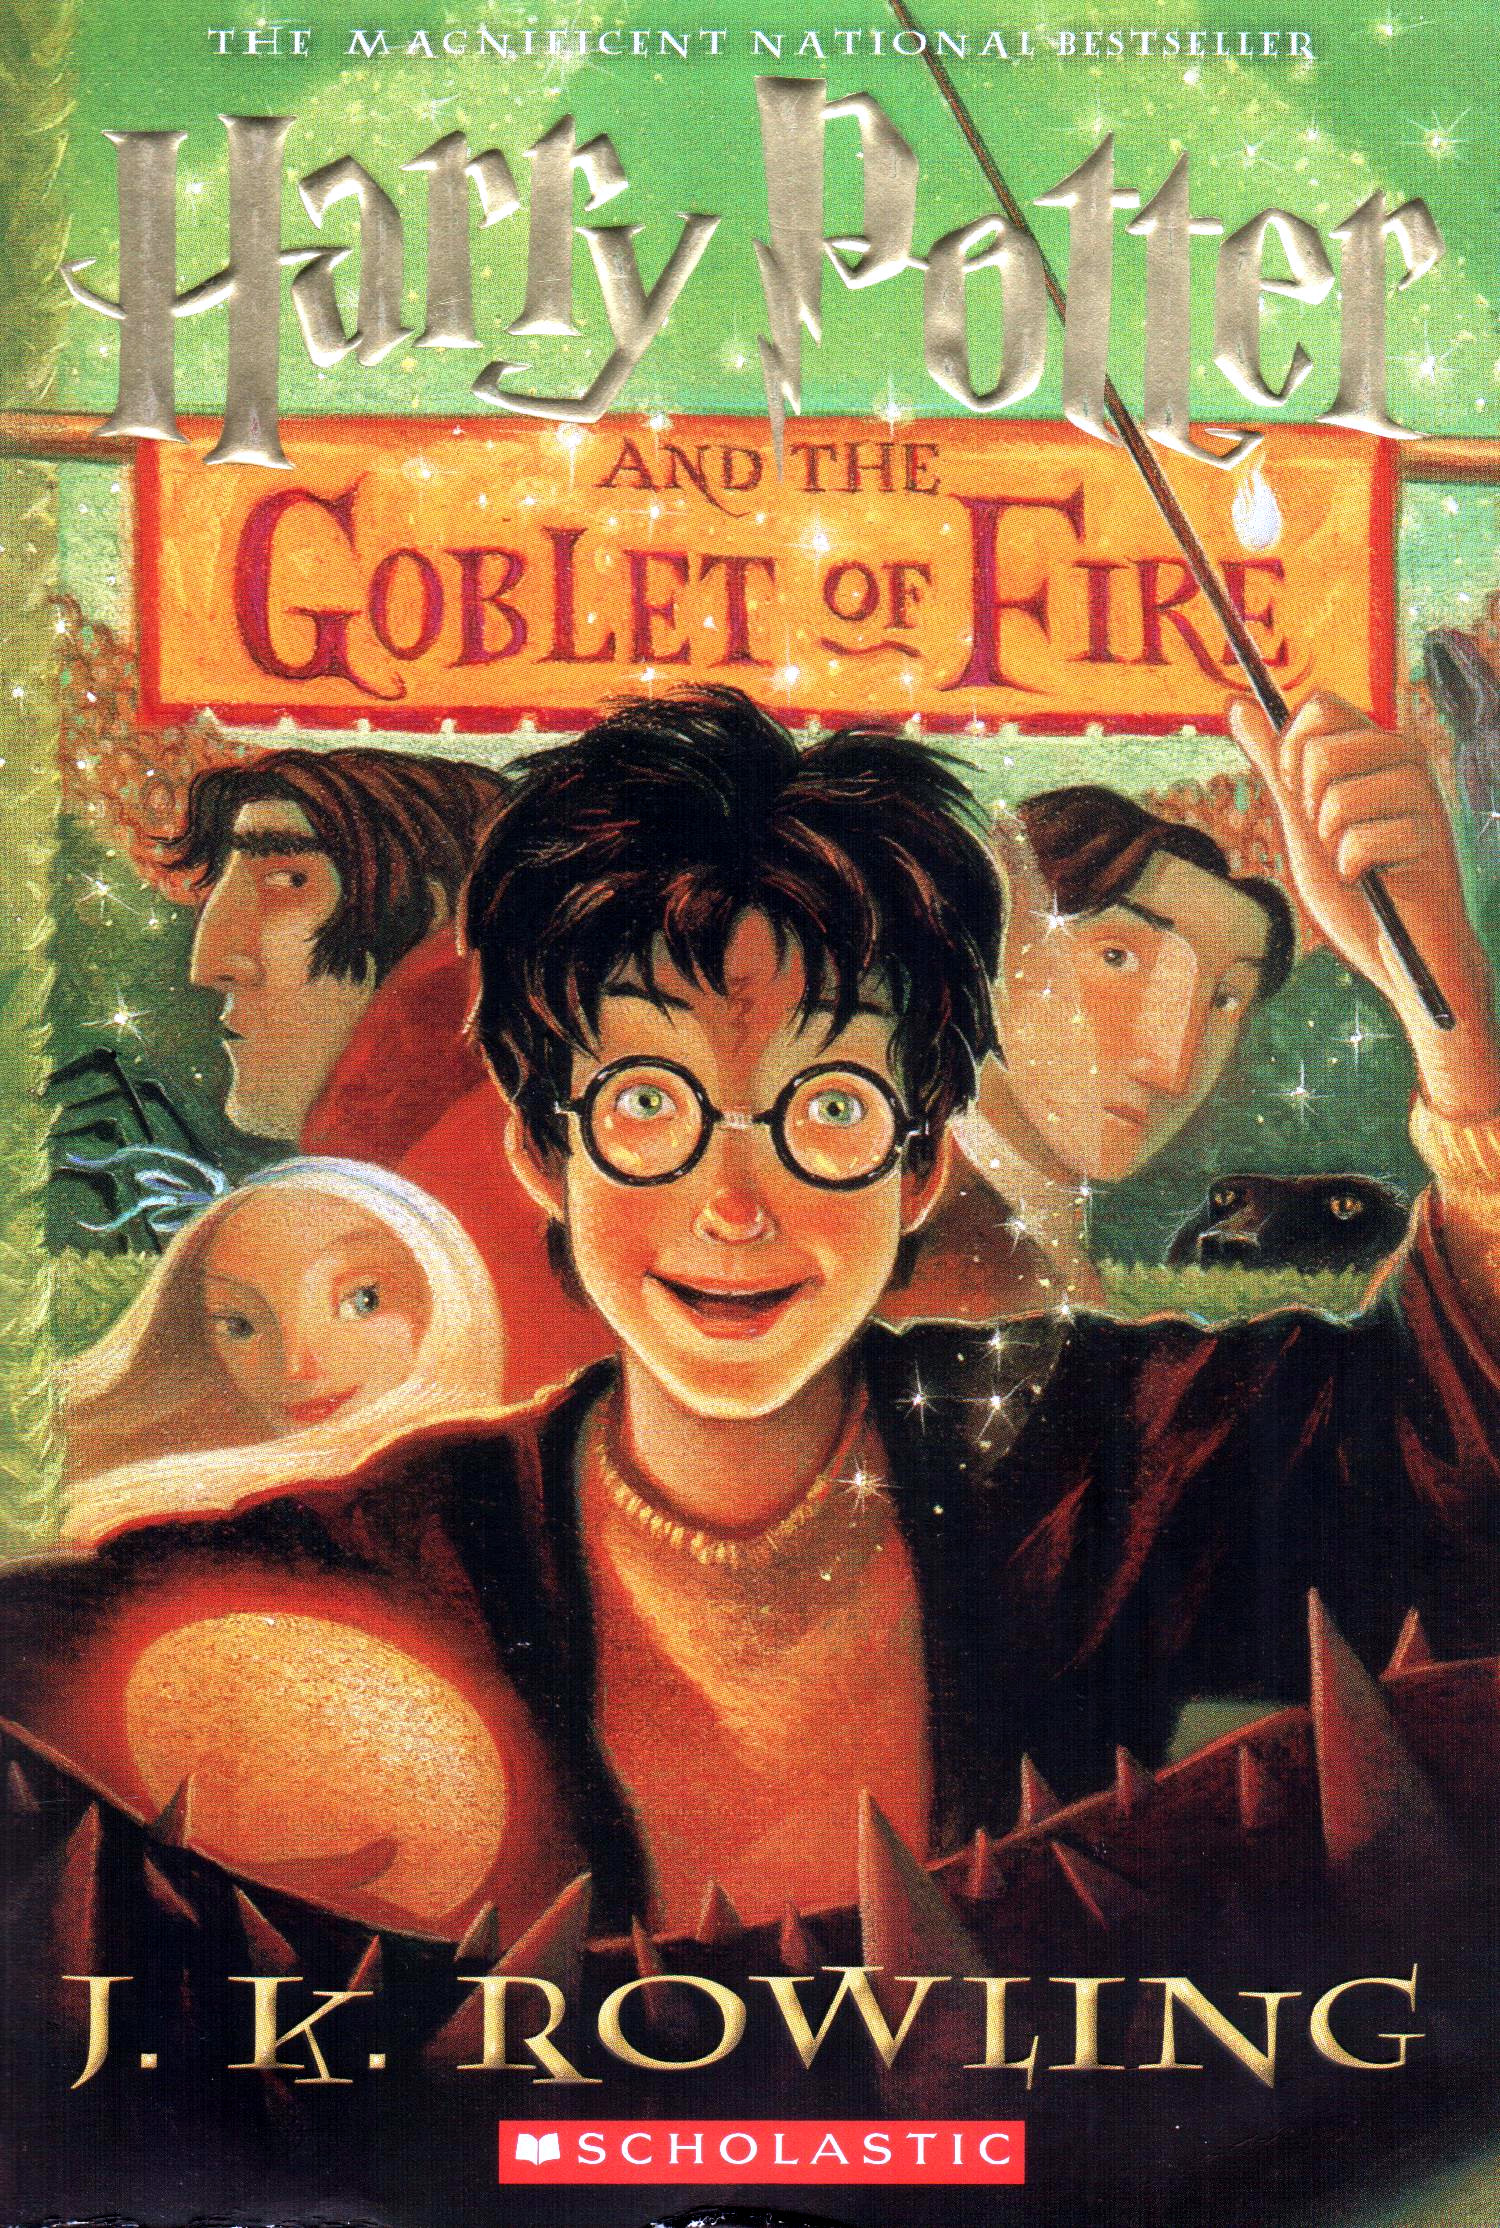 Harry Potter (4) and the Goblet of Fire